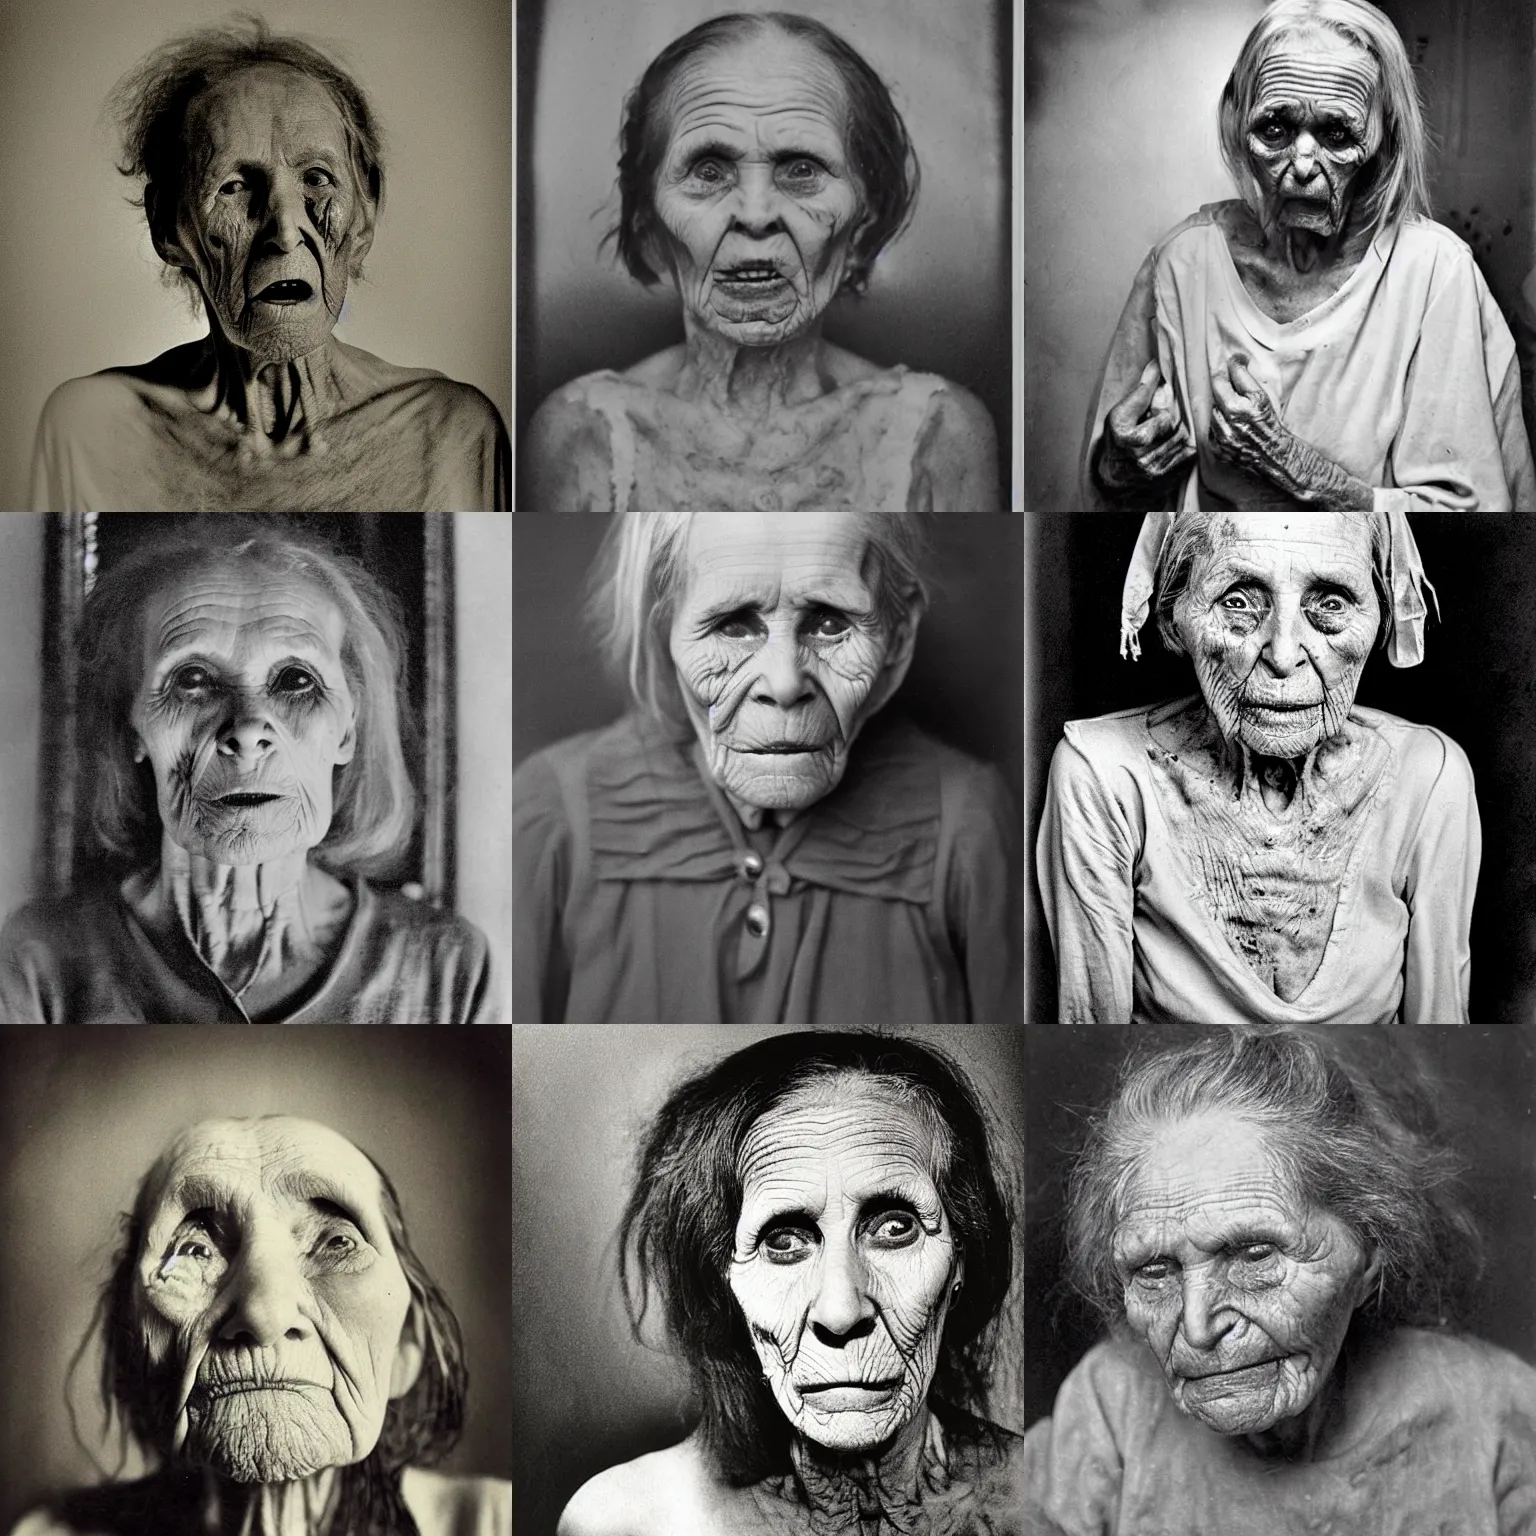 Prompt: portrait of a criminally insane elderly woman possessed by demons, unkempt, wrinkled, gaunt, deep lines and shadows, highly disturbing, sanitarium archive photograph